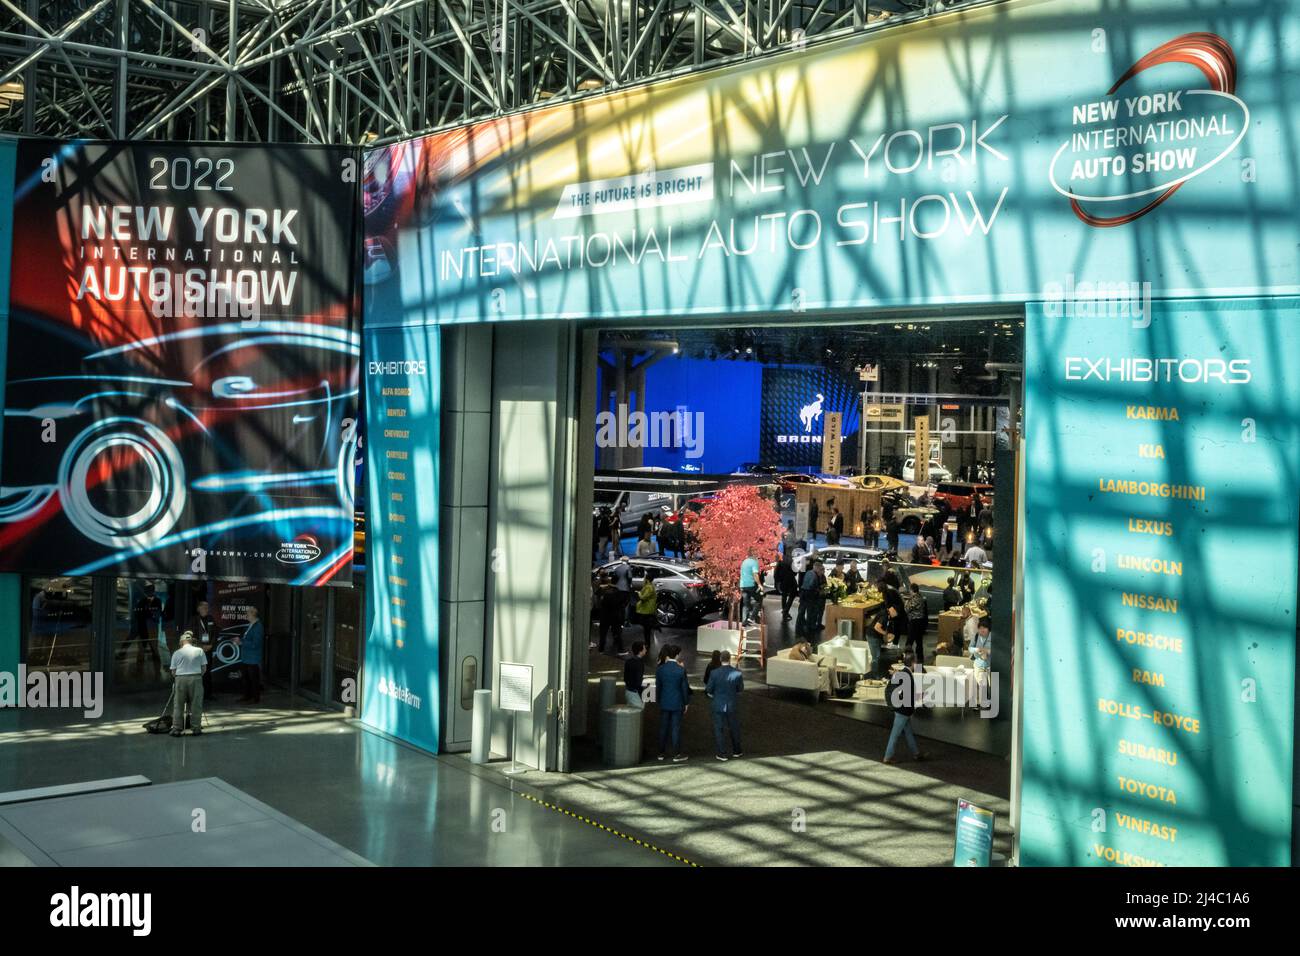 New York, USA. 13th Apr, 2022. The 2022 New York International Auto Show at the Javits Center in New York City. The normally annual show opened today after it was cancelled the two previous years due to the COVID-19 pandemic. Credit: Enrique Shore/Alamy Live News Stock Photo